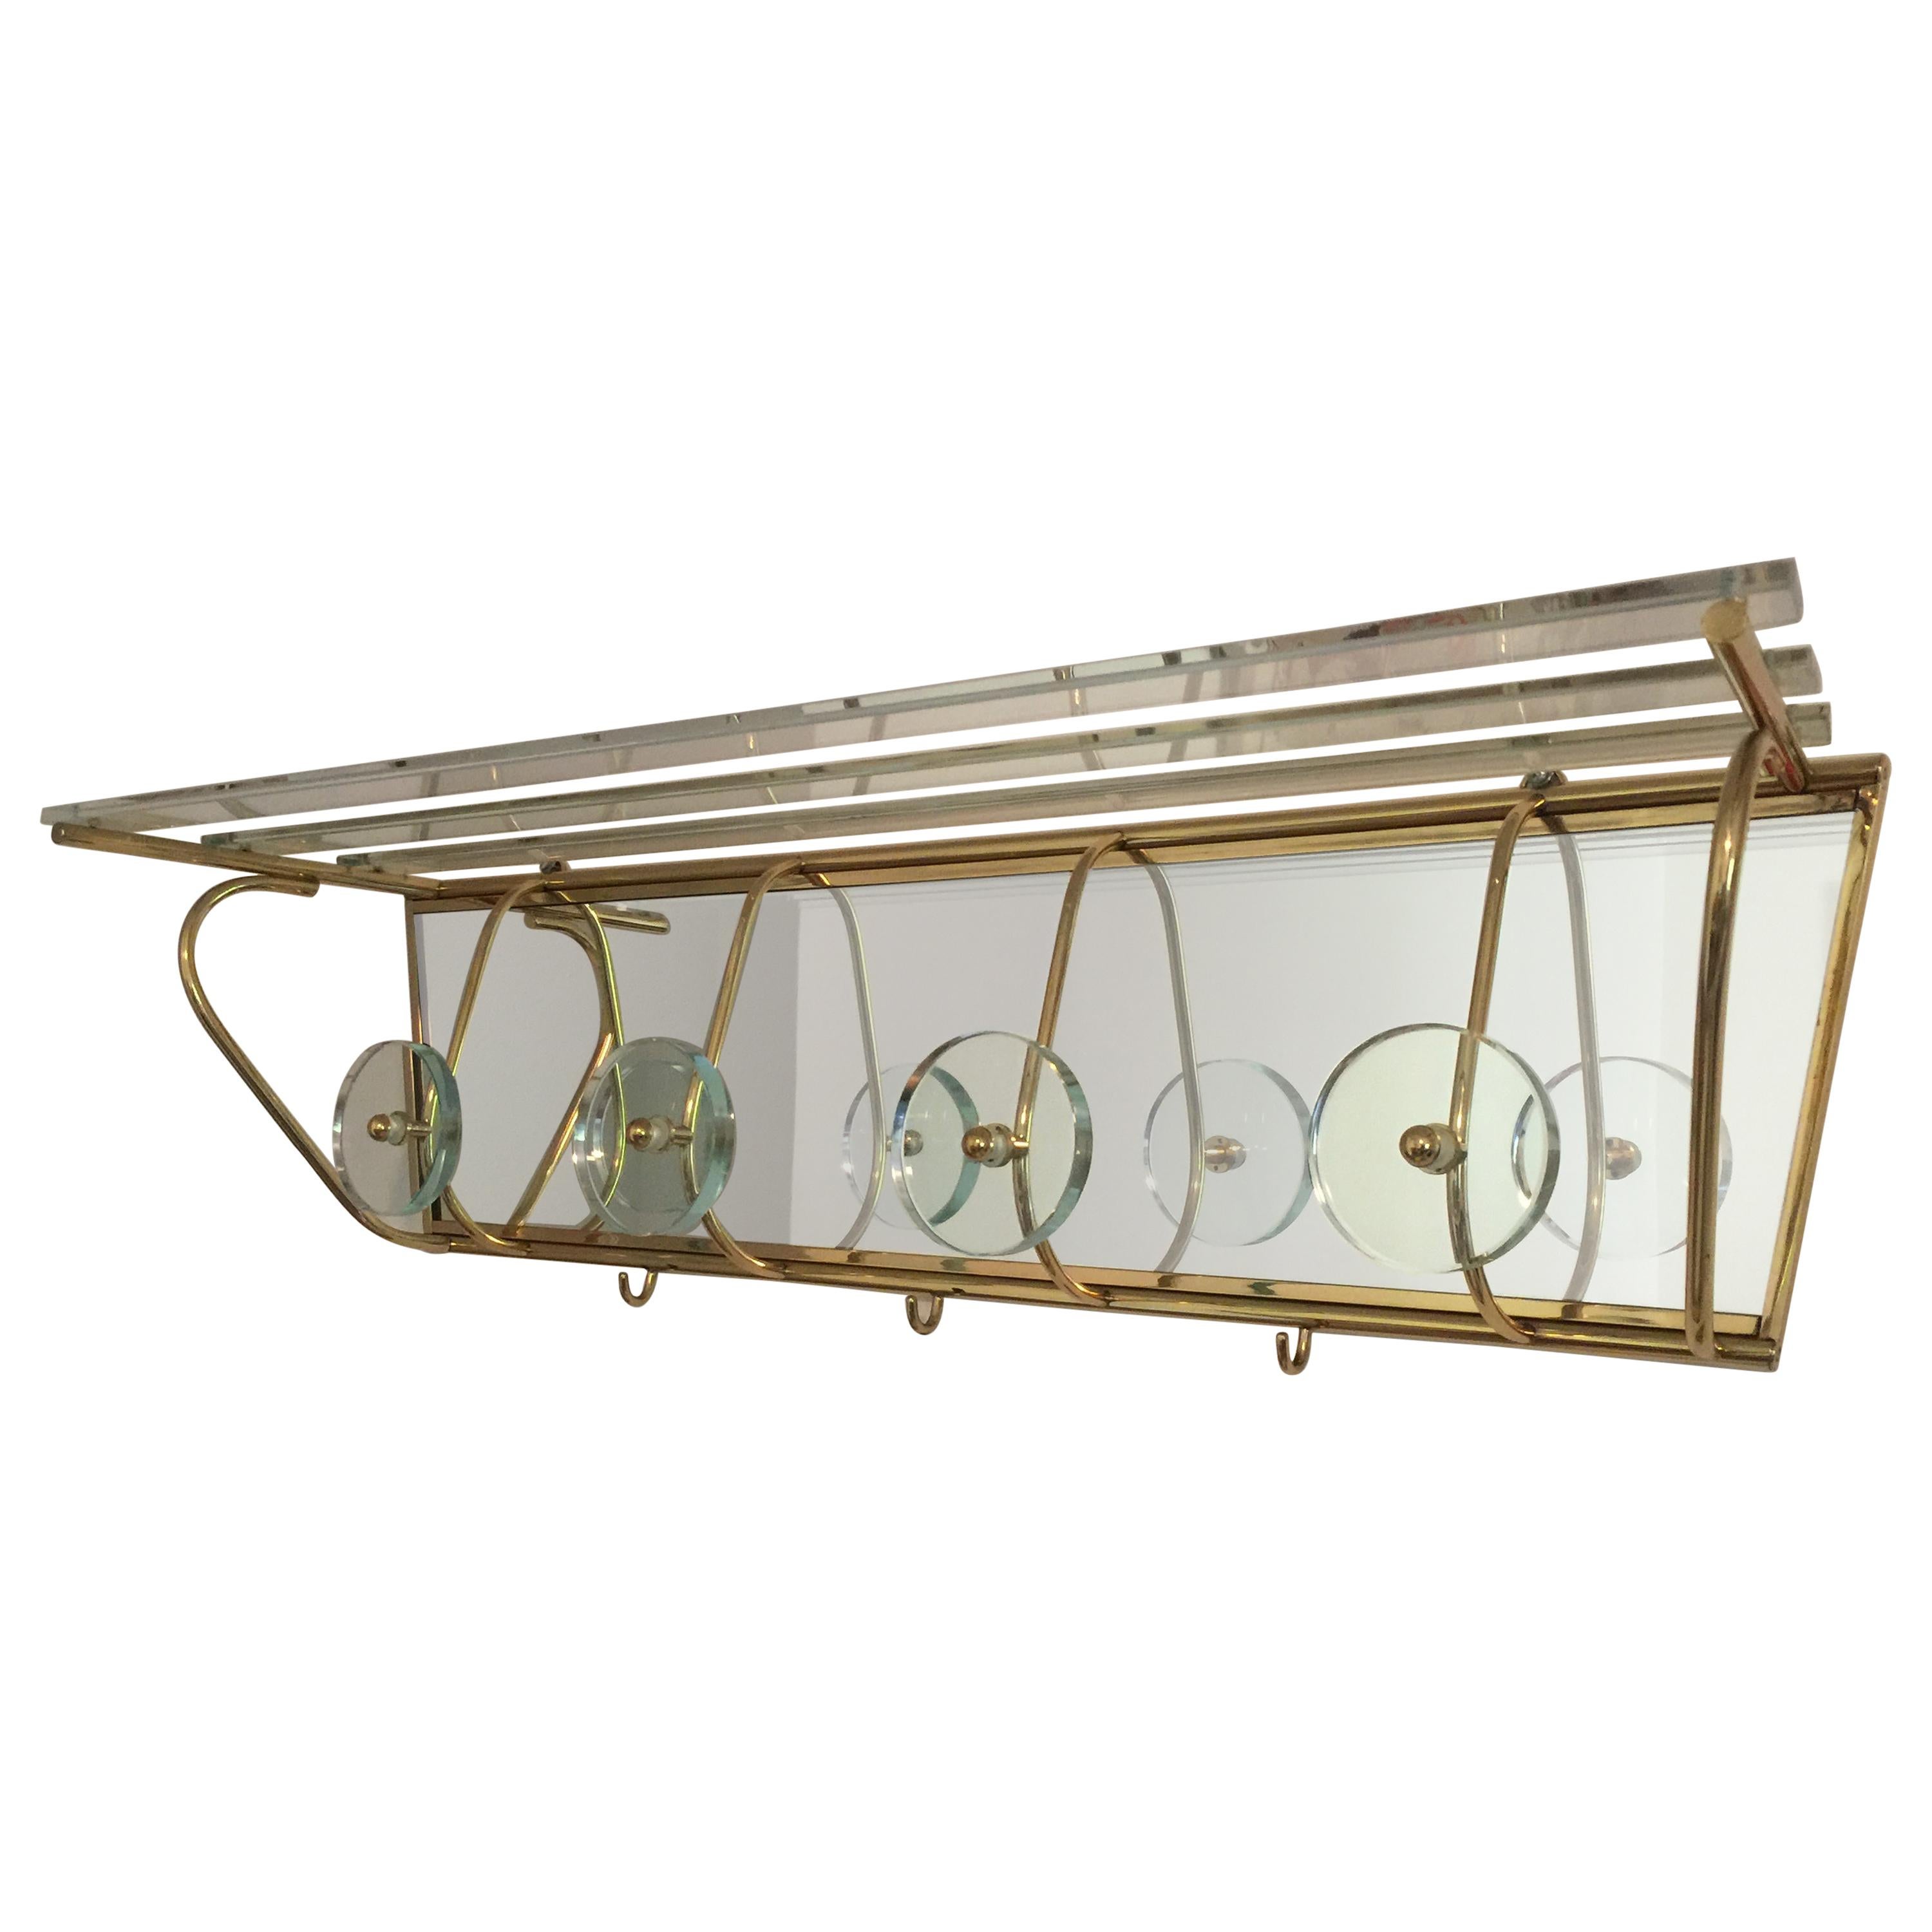 This is the largest mirrored coat rack in the style of Fontana Arte with glass and brass. Features 4 original glass discs to hang coats, the rack above for hats and 3 brass hooks for scarves.